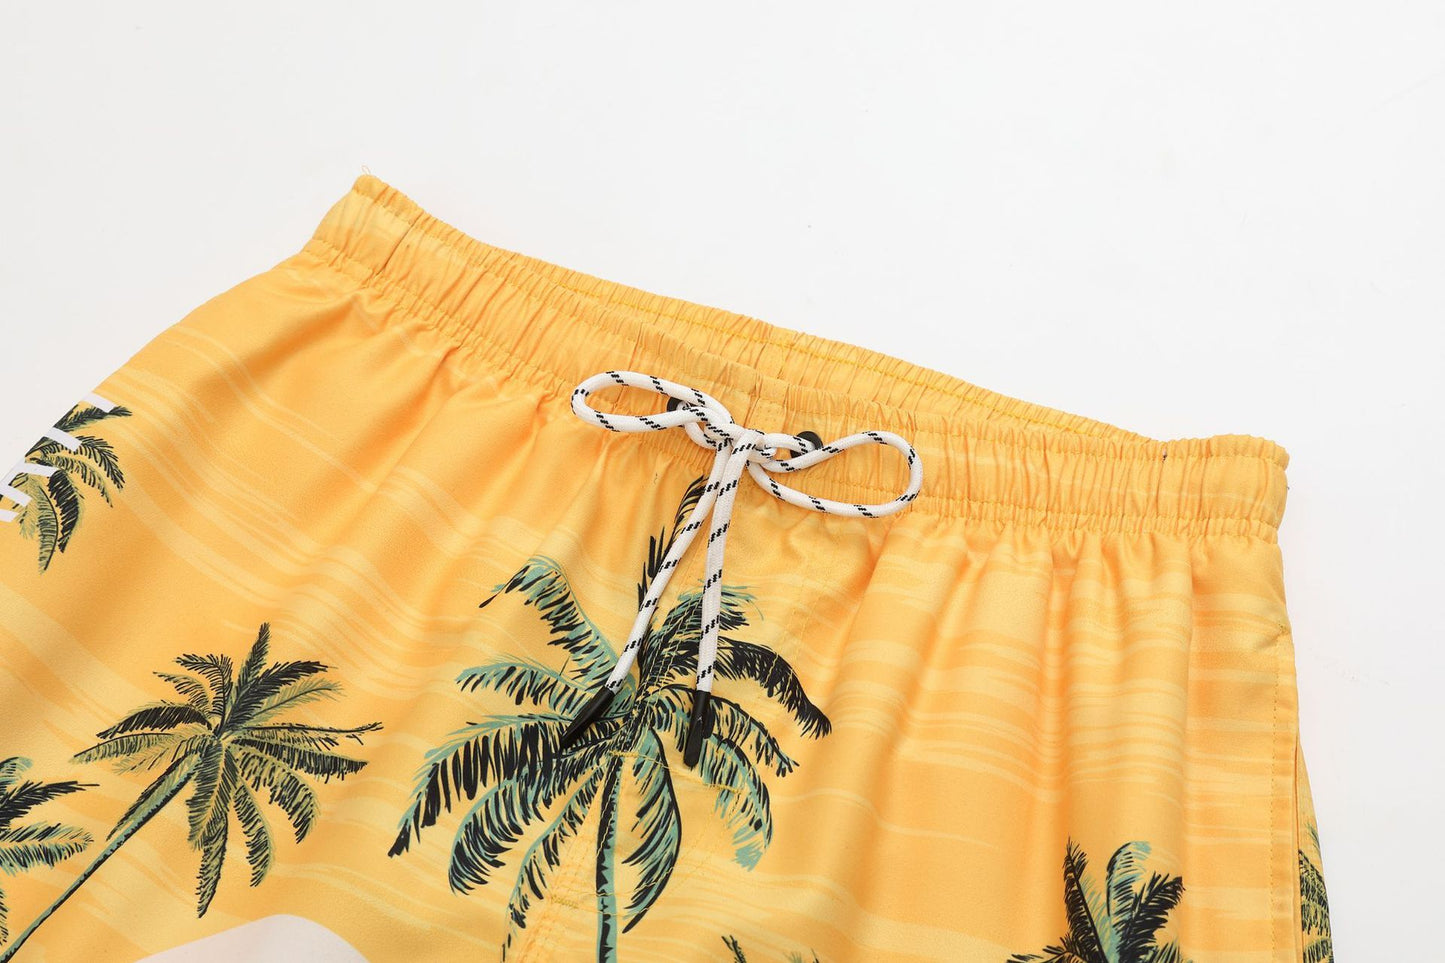 Coconut Pattern Beach Shorts For Men And Women